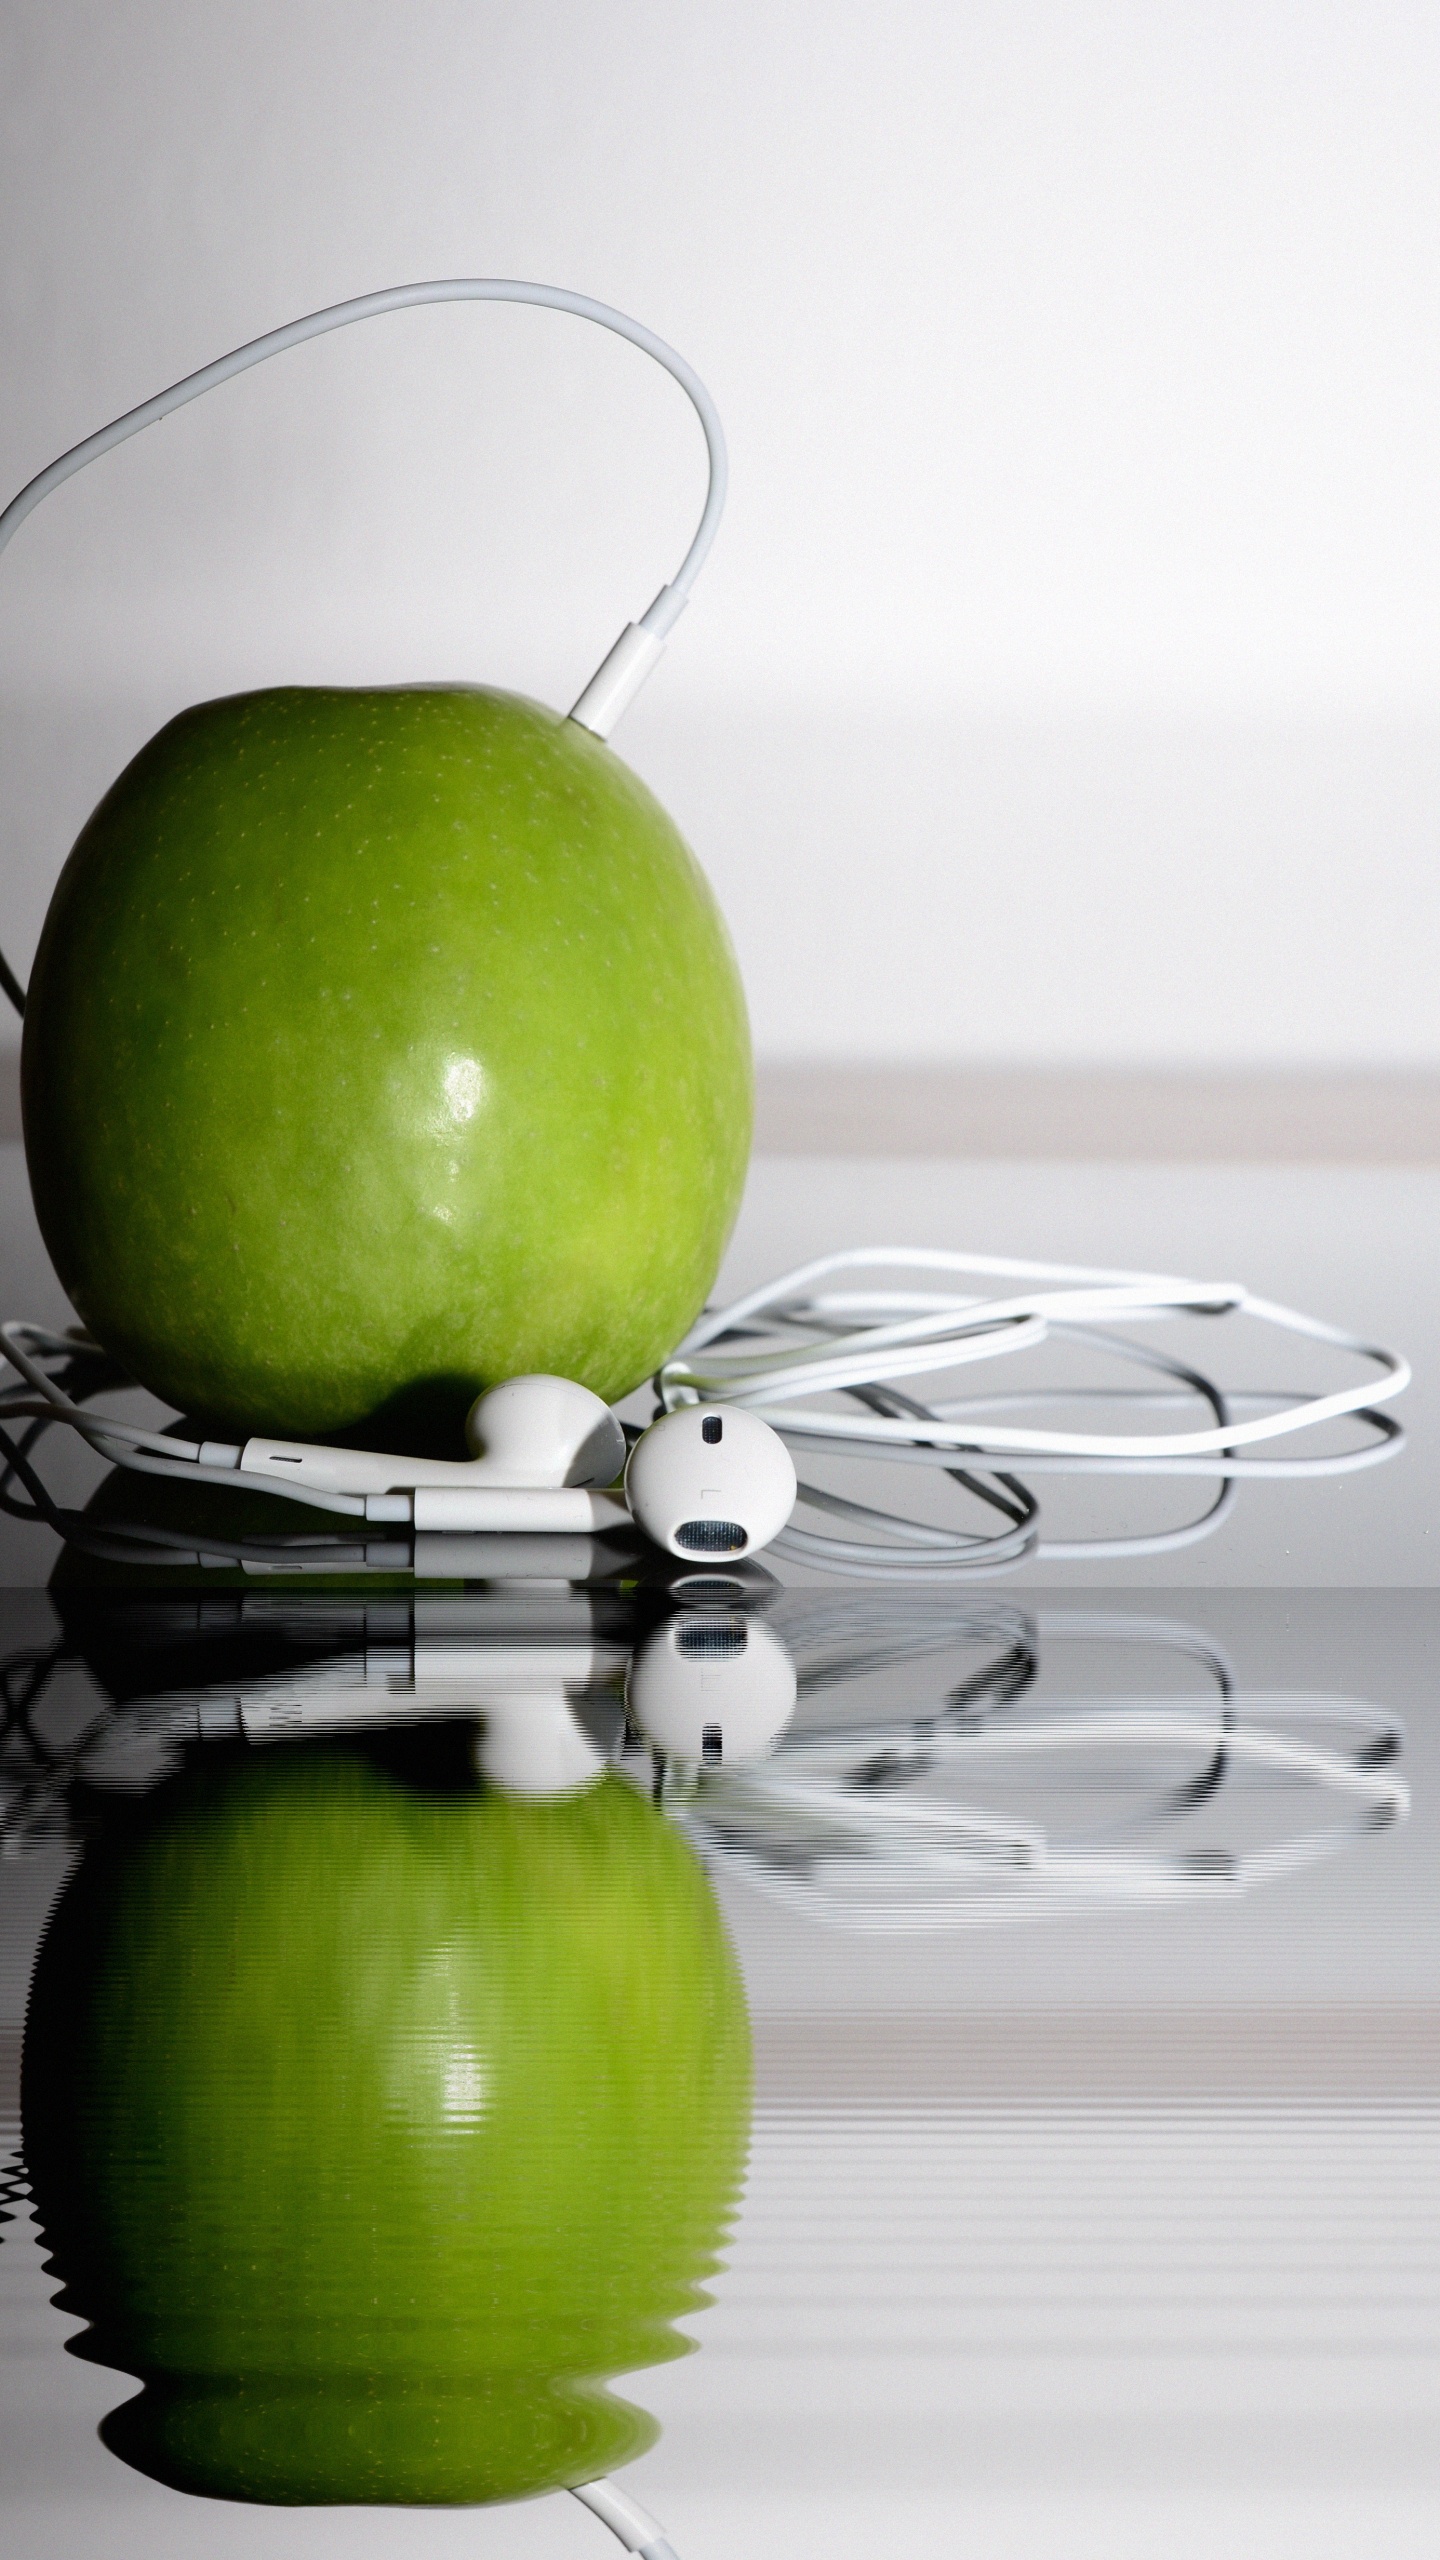 Apple Auriculares, Auriculares, Verde, Granny Smith, Apple. Wallpaper in 1440x2560 Resolution